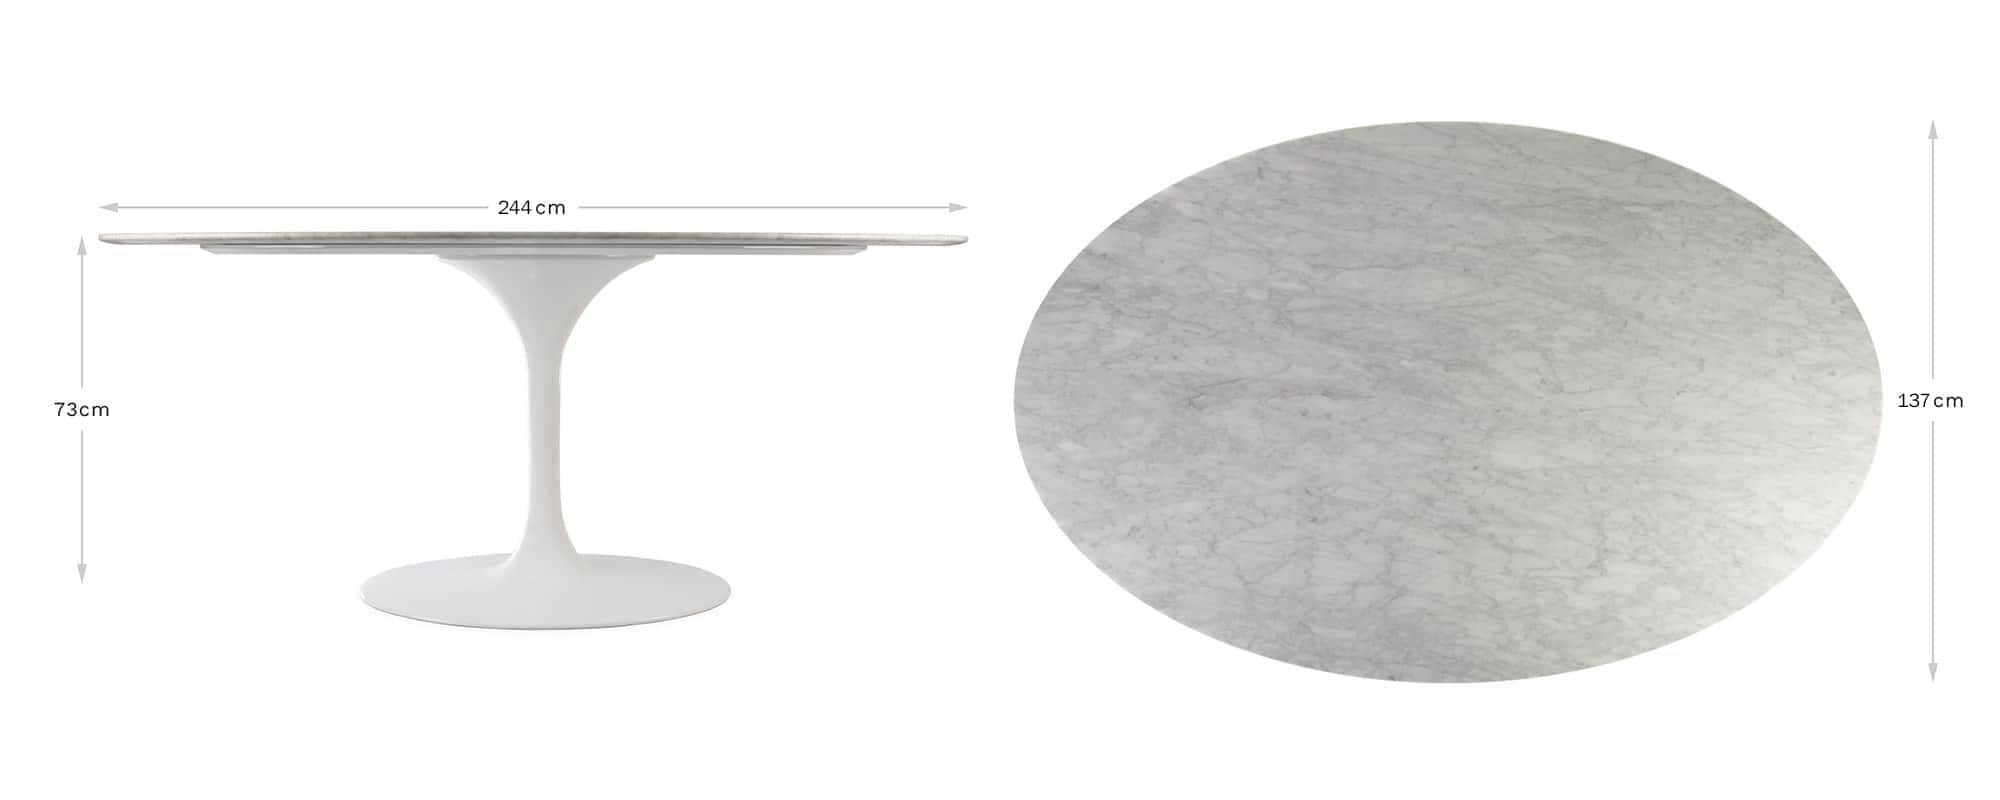 A profile side on and top-down view of a large oval 244 x 137 cm Tulip Table to provide a visual reference to the height, width and length of the table